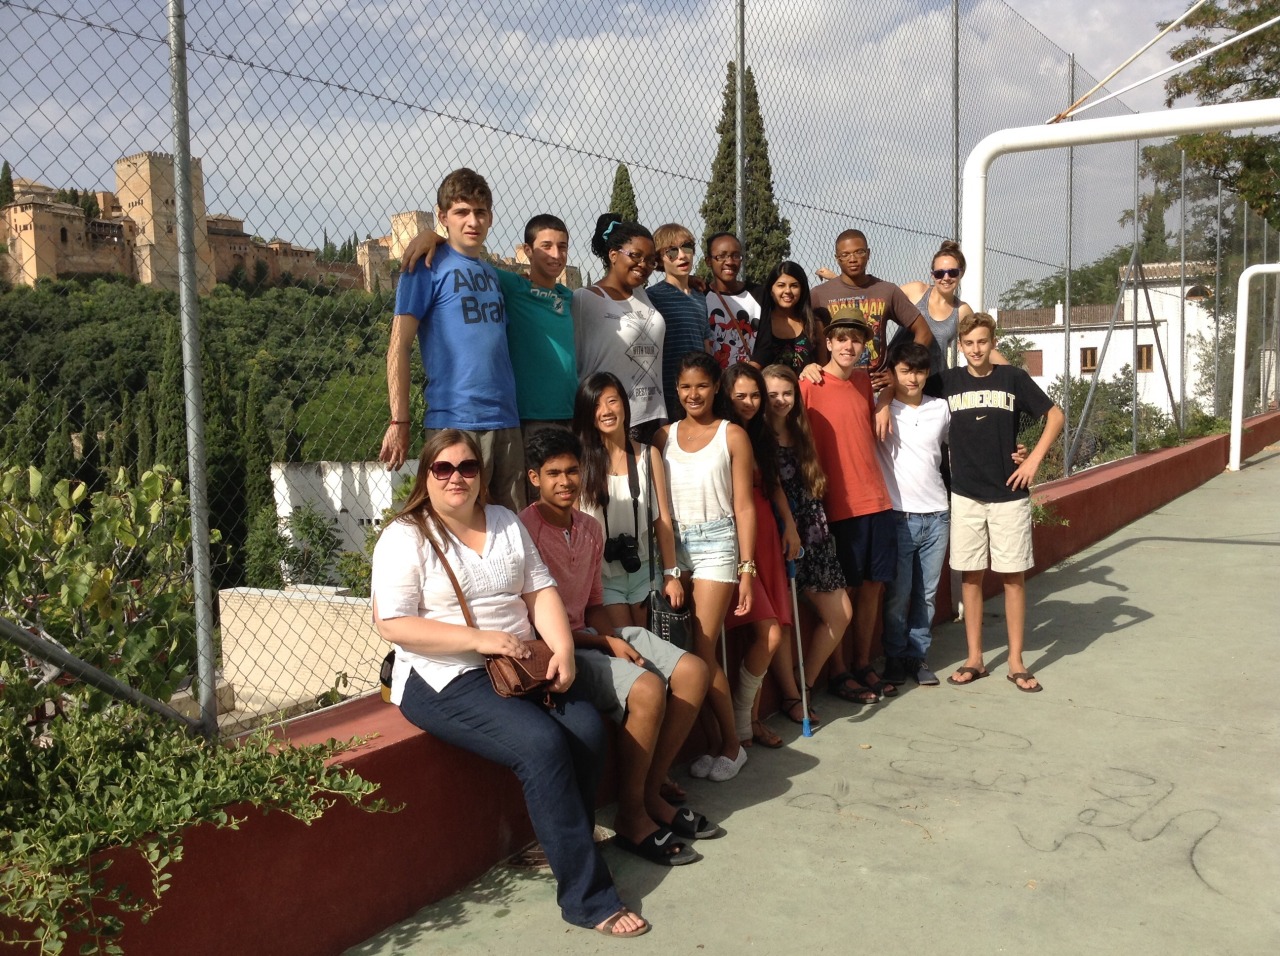 After two intense weeks improving their Spanish at the CELEI language and culture institute, it&#8217;s time for our Experimenters to say adios to the city of Granada and hola to their home-stay familias acogidas in the beautiful town of Priego, Cordoba.  Although there was some sadness saying goodbye to newly beloved fellow Experimenters and we&#8217;ll certainly miss the stunning view of the Alhambra from our residence in Granada, the group is excited to begin the next chapter of the program. While sometimes challenging, the home-stay component of the program is usually the most rewarding. Our Experimenters will be deeply immersed in modern Spanish culture, actively participate in every-day family life in Spain, use their much improved Spanish in authentic contexts and, perhaps most importantly, form bonds of friendship with their host brothers and sisters that could last a lifetime. That&#8217;s what the Experiment is really all about: bridging cultural divides through friendship formed by living together.